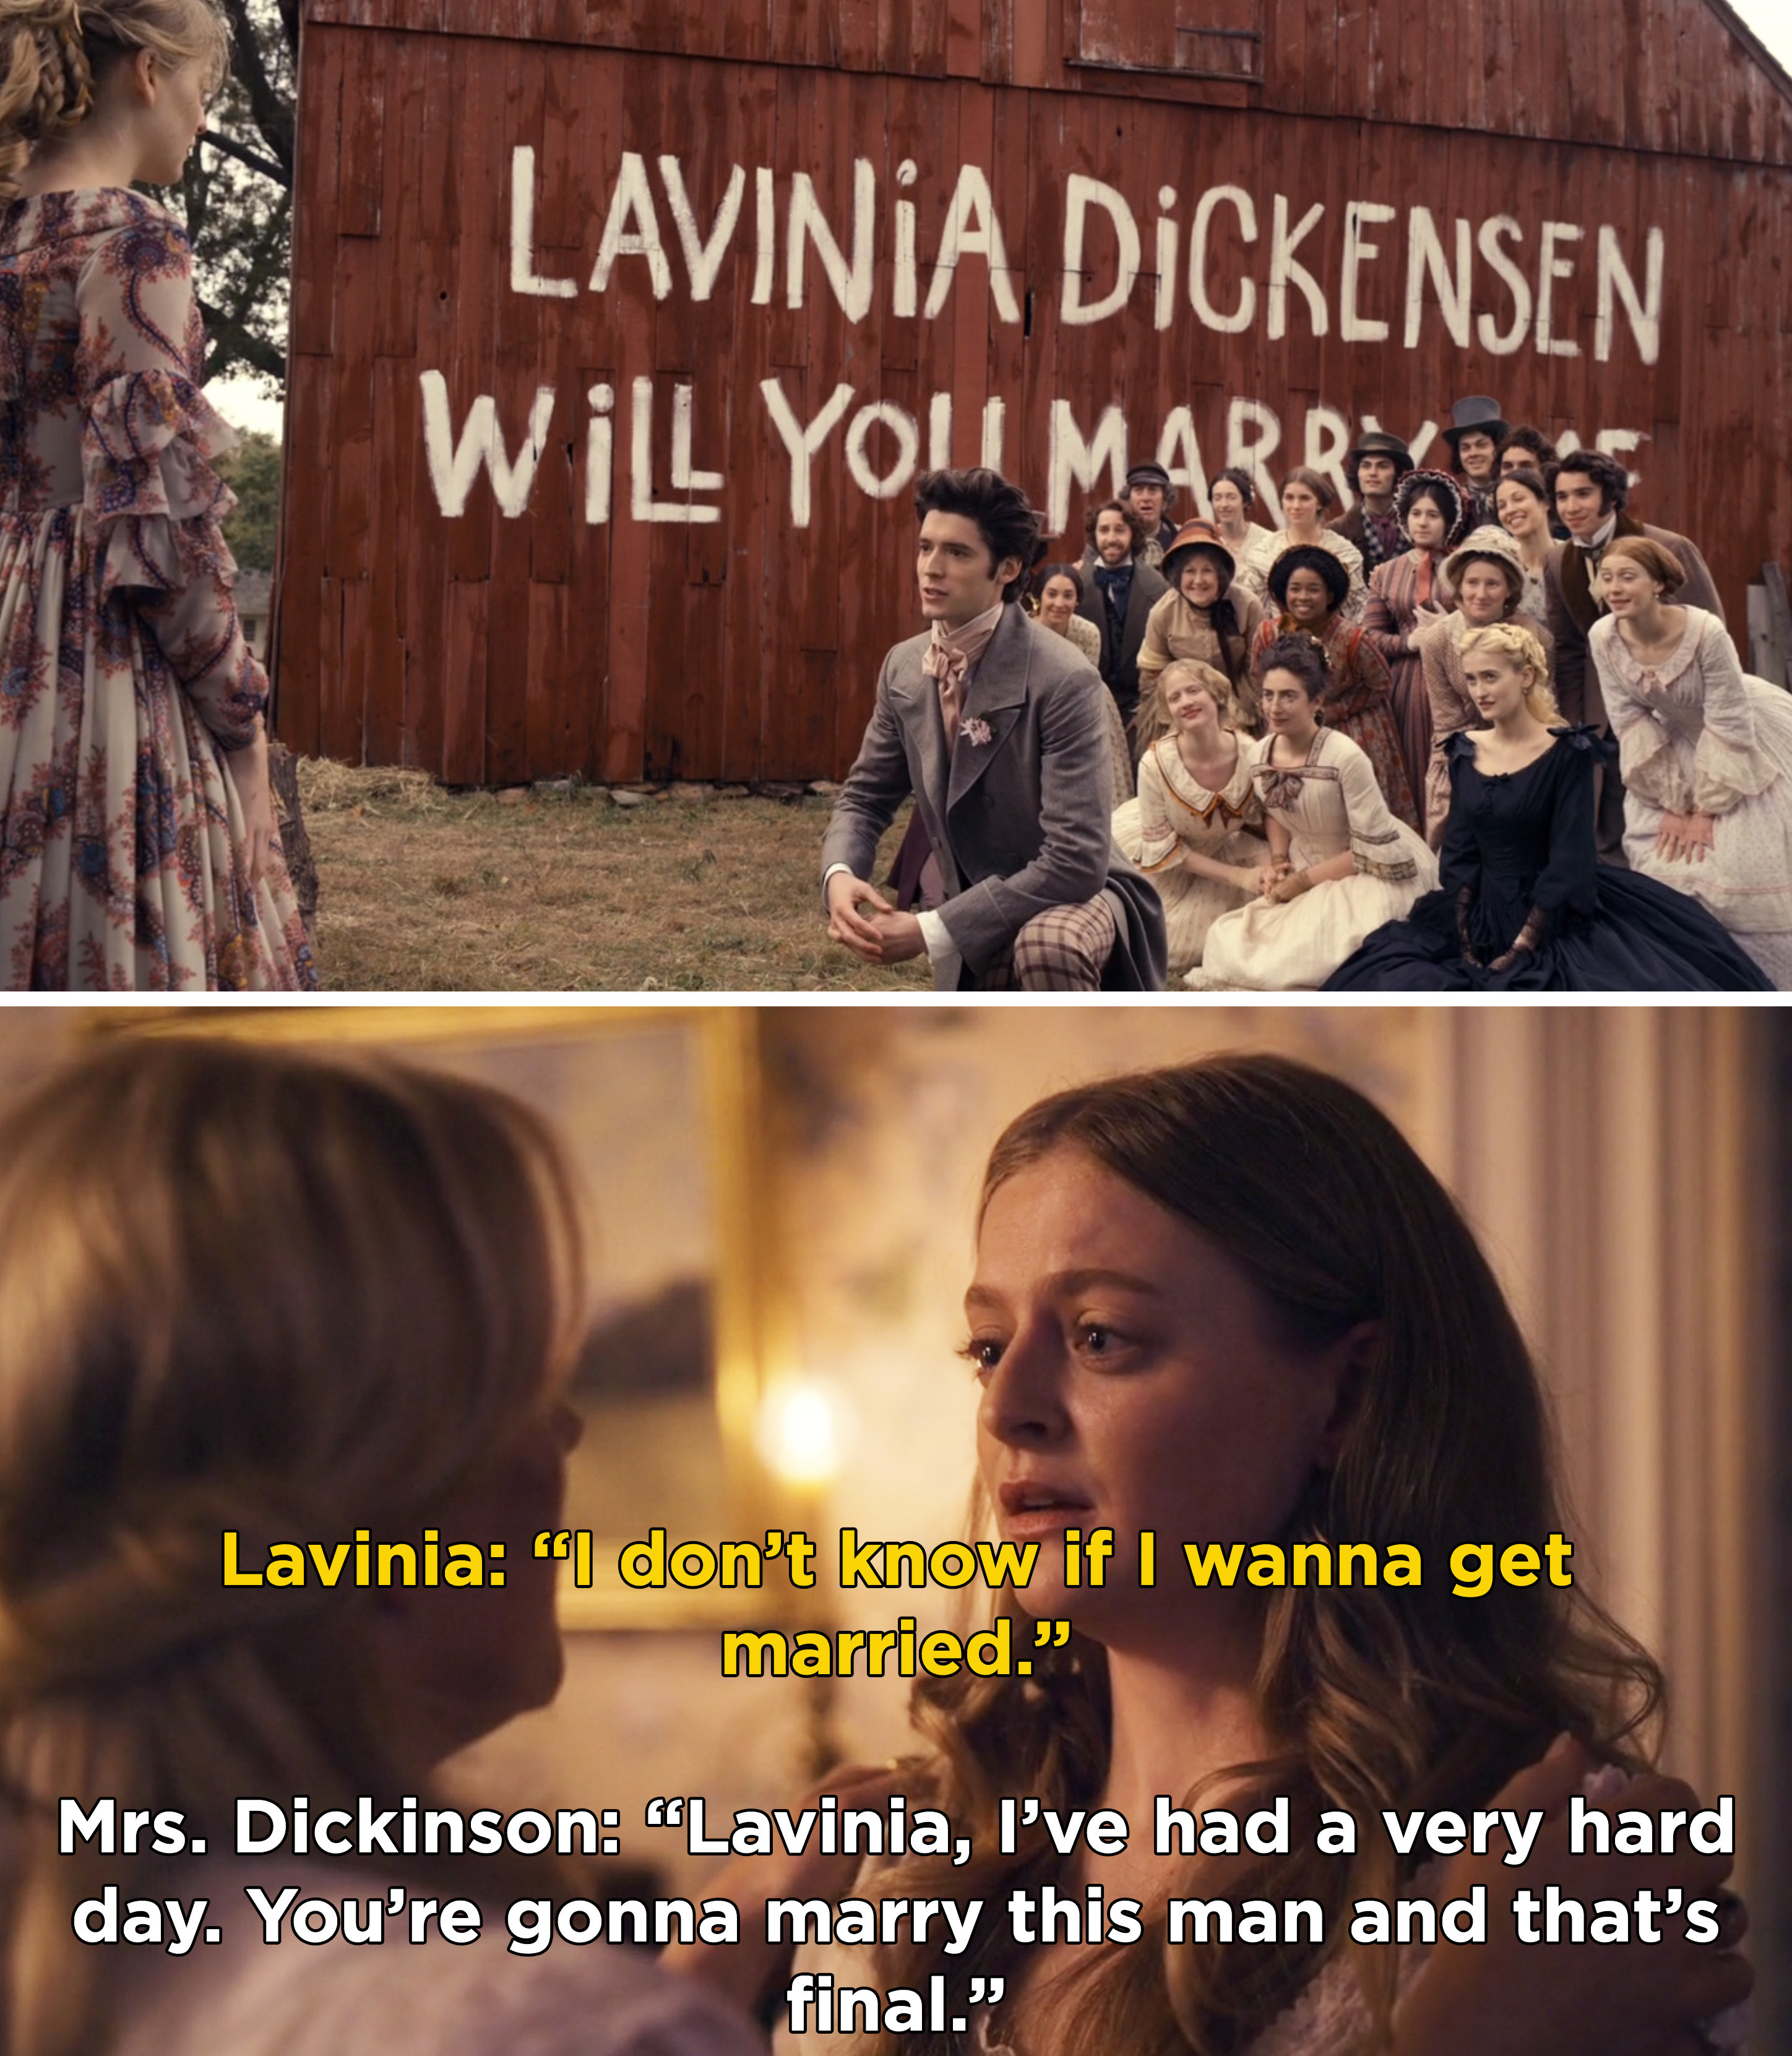 Ship kneeling and proposing to Lavinia in front of a bar with a massive sign that reads &quot;Lavinia Dickinson, will you marry me?&quot; and then Lavinia telling her mom she doesn&#x27;t want to marry him, but Mrs. Dickinson insists that she does